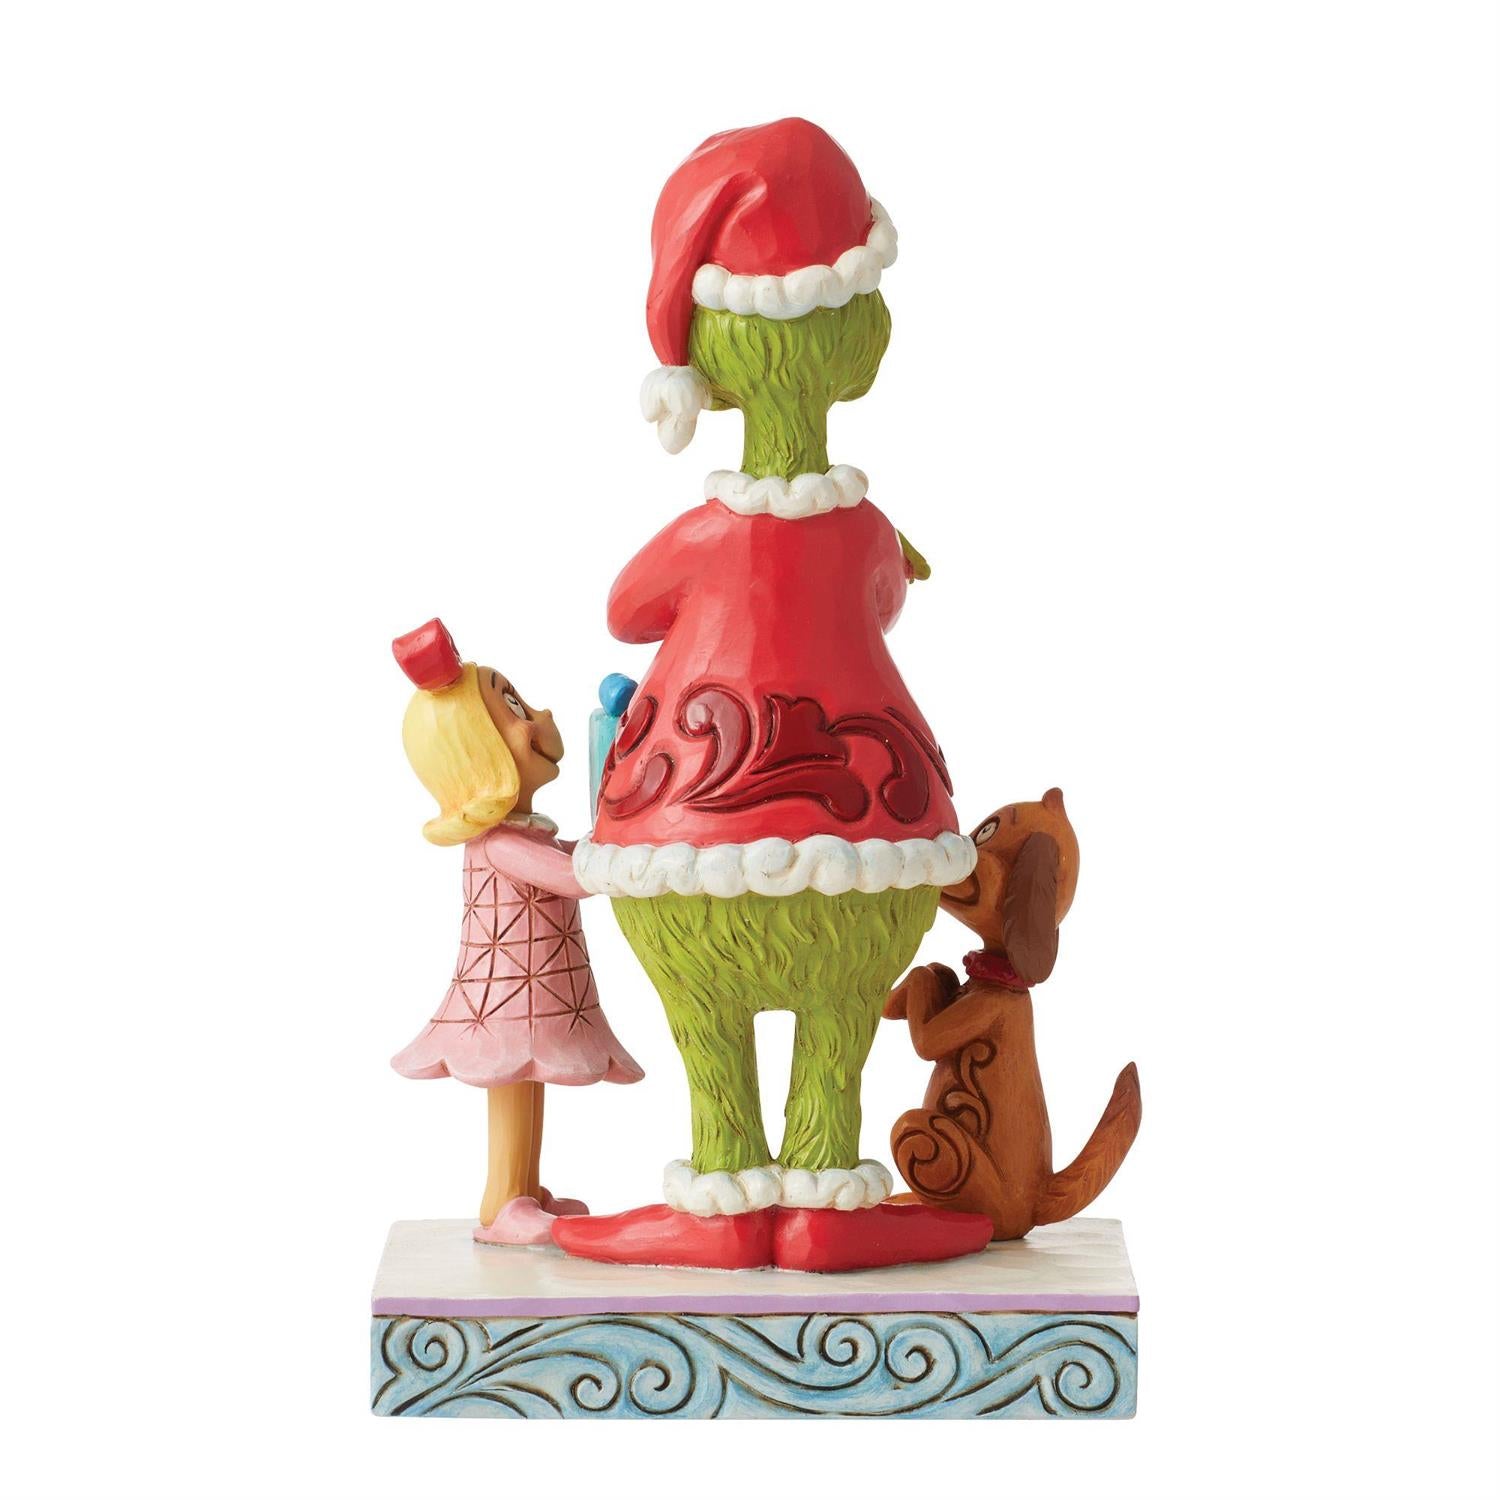 Grinch Max and Cindy Lou giving gift Figurine